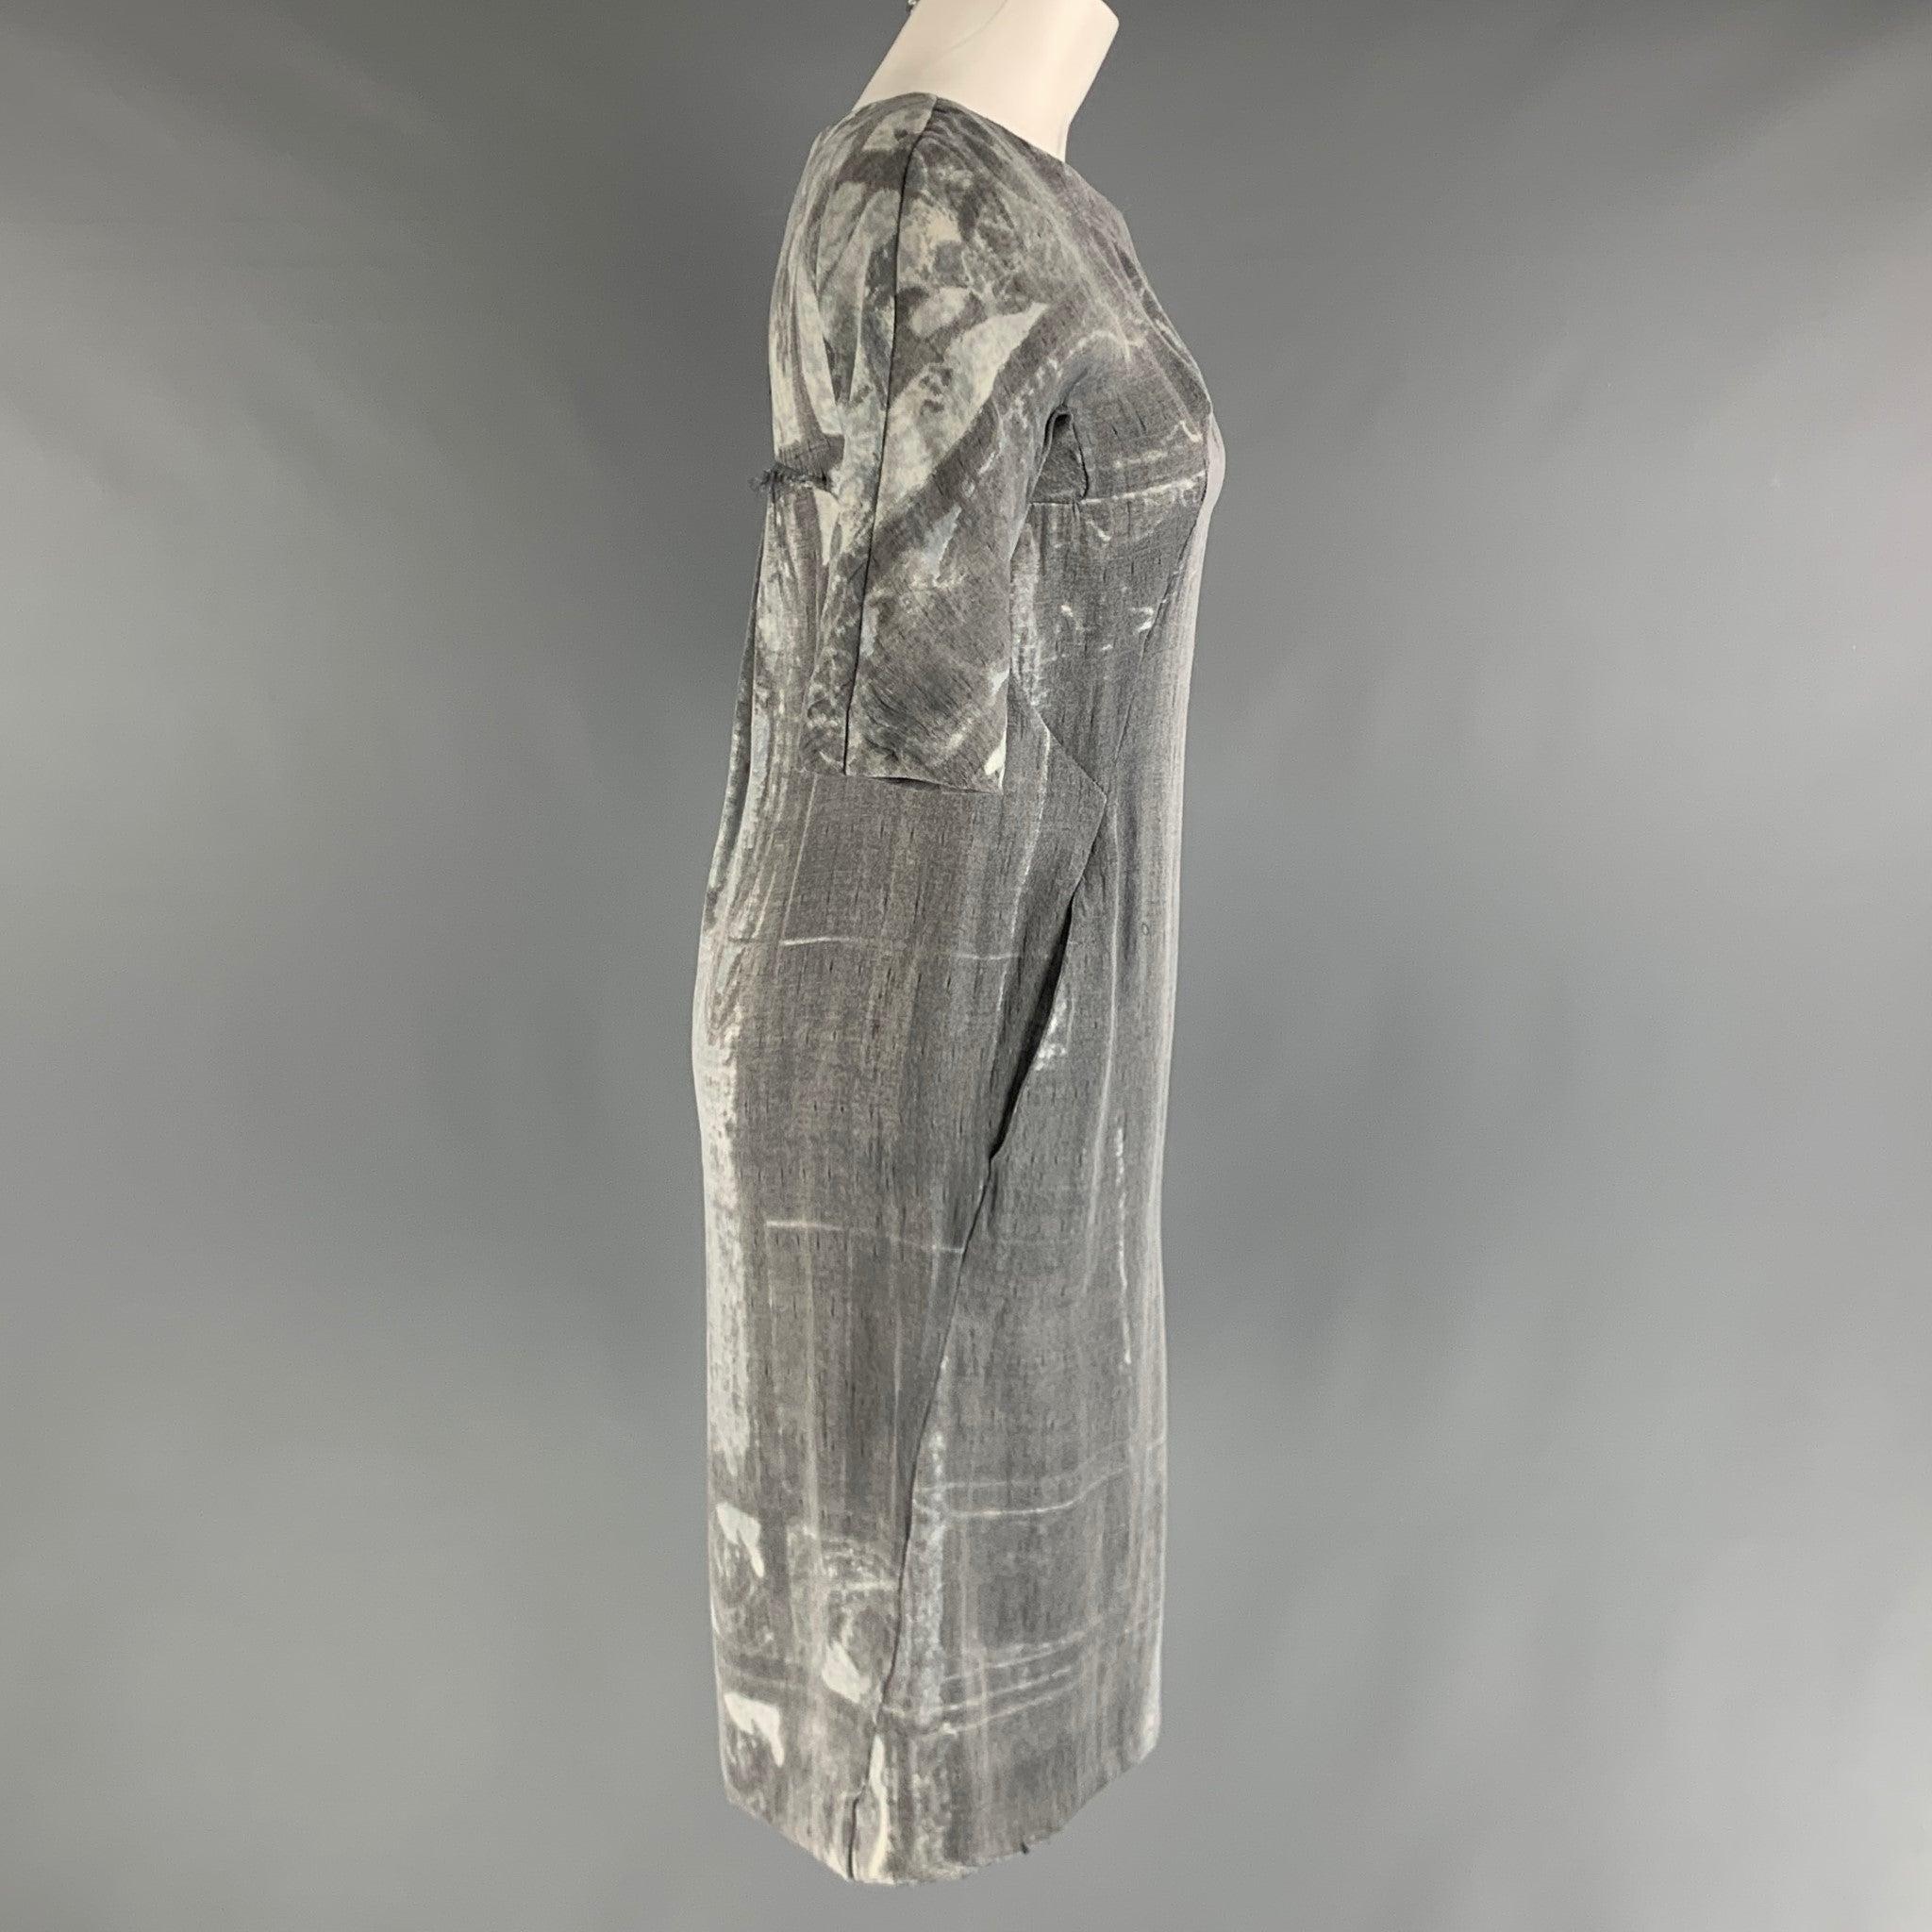 MARNI dress comes in a grey and silver polyester and silk woven material featuring pockets, and marbled print, and scoop neck. Made in Italy.Very Good Pre-Owned Condition. 

Marked:  38 

Measurements: 
 
Shoulder: 15 inches Bust: 32 inches Waist: